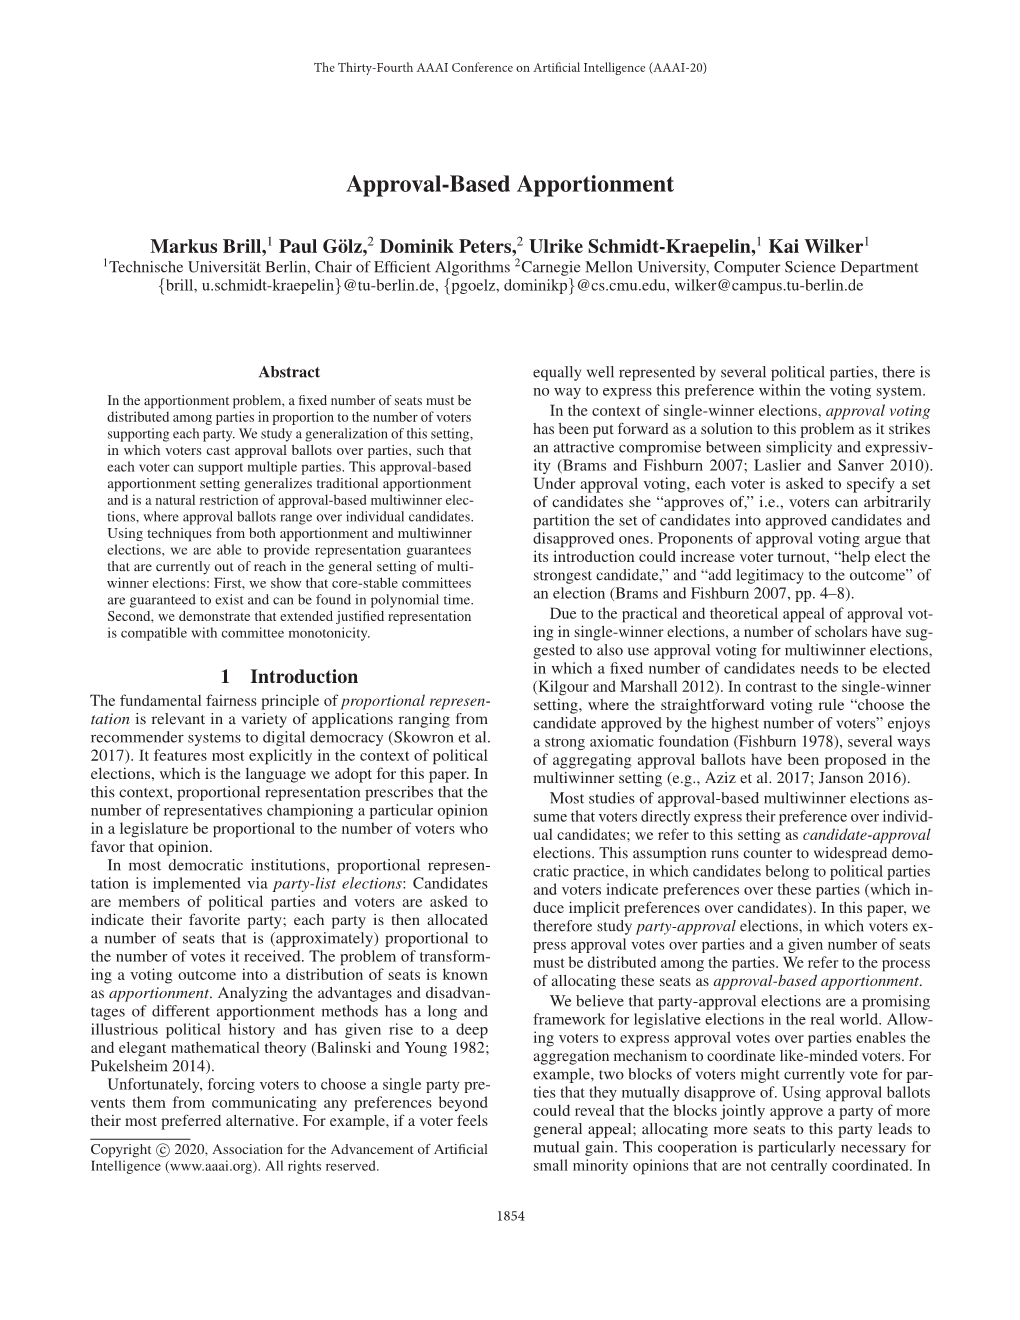 Approval-Based Apportionment